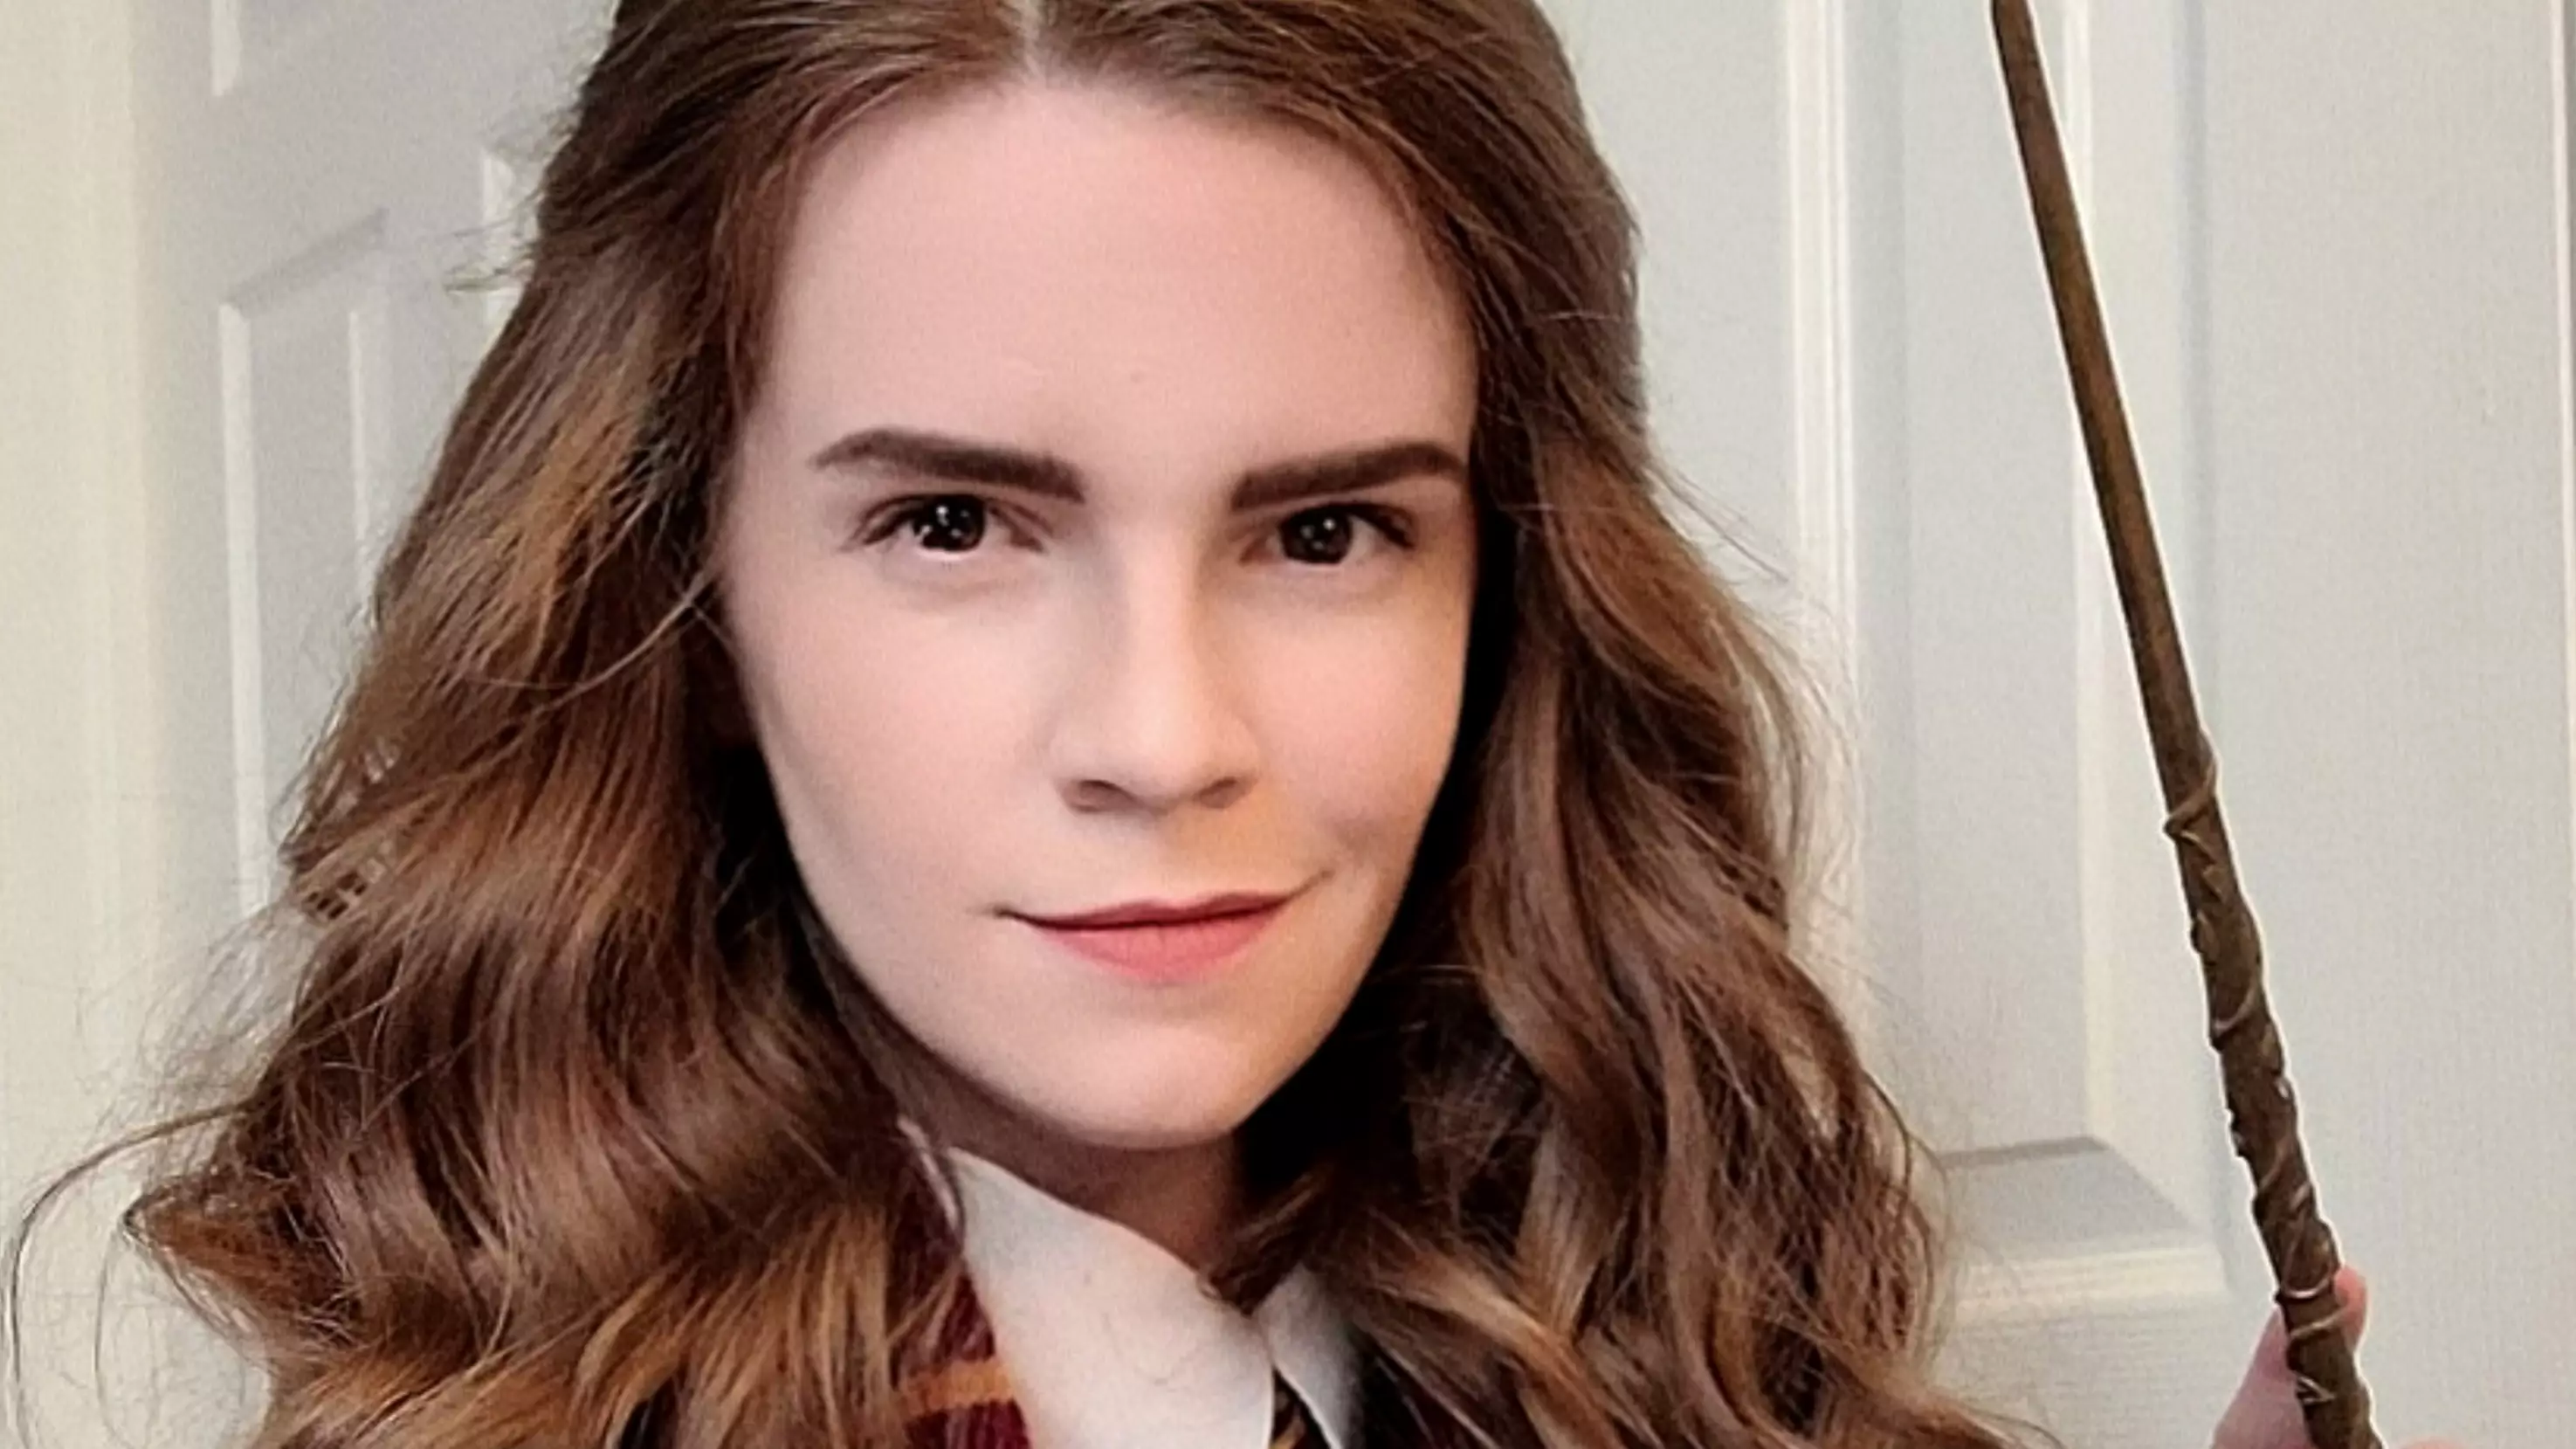 Woman Looks So Much Like Hermione Granger Even Her Own Mum Can't Tell Them Apart